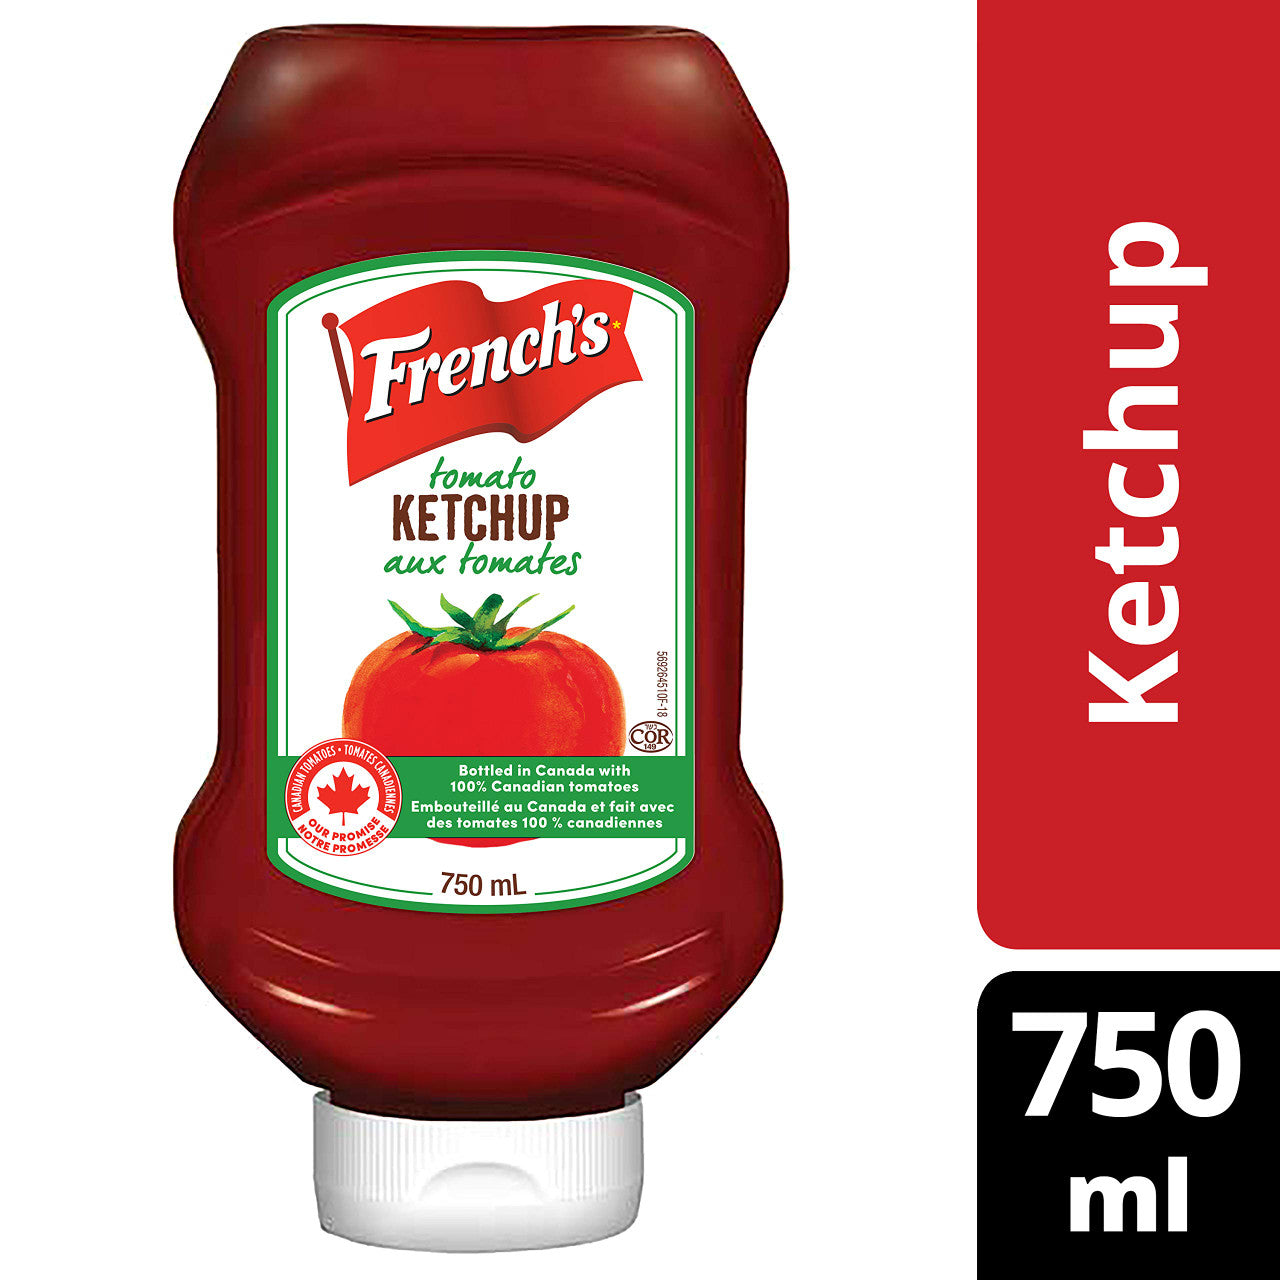 FRENCH'S Ketchup, 750ml bottle {Imported from Canada}